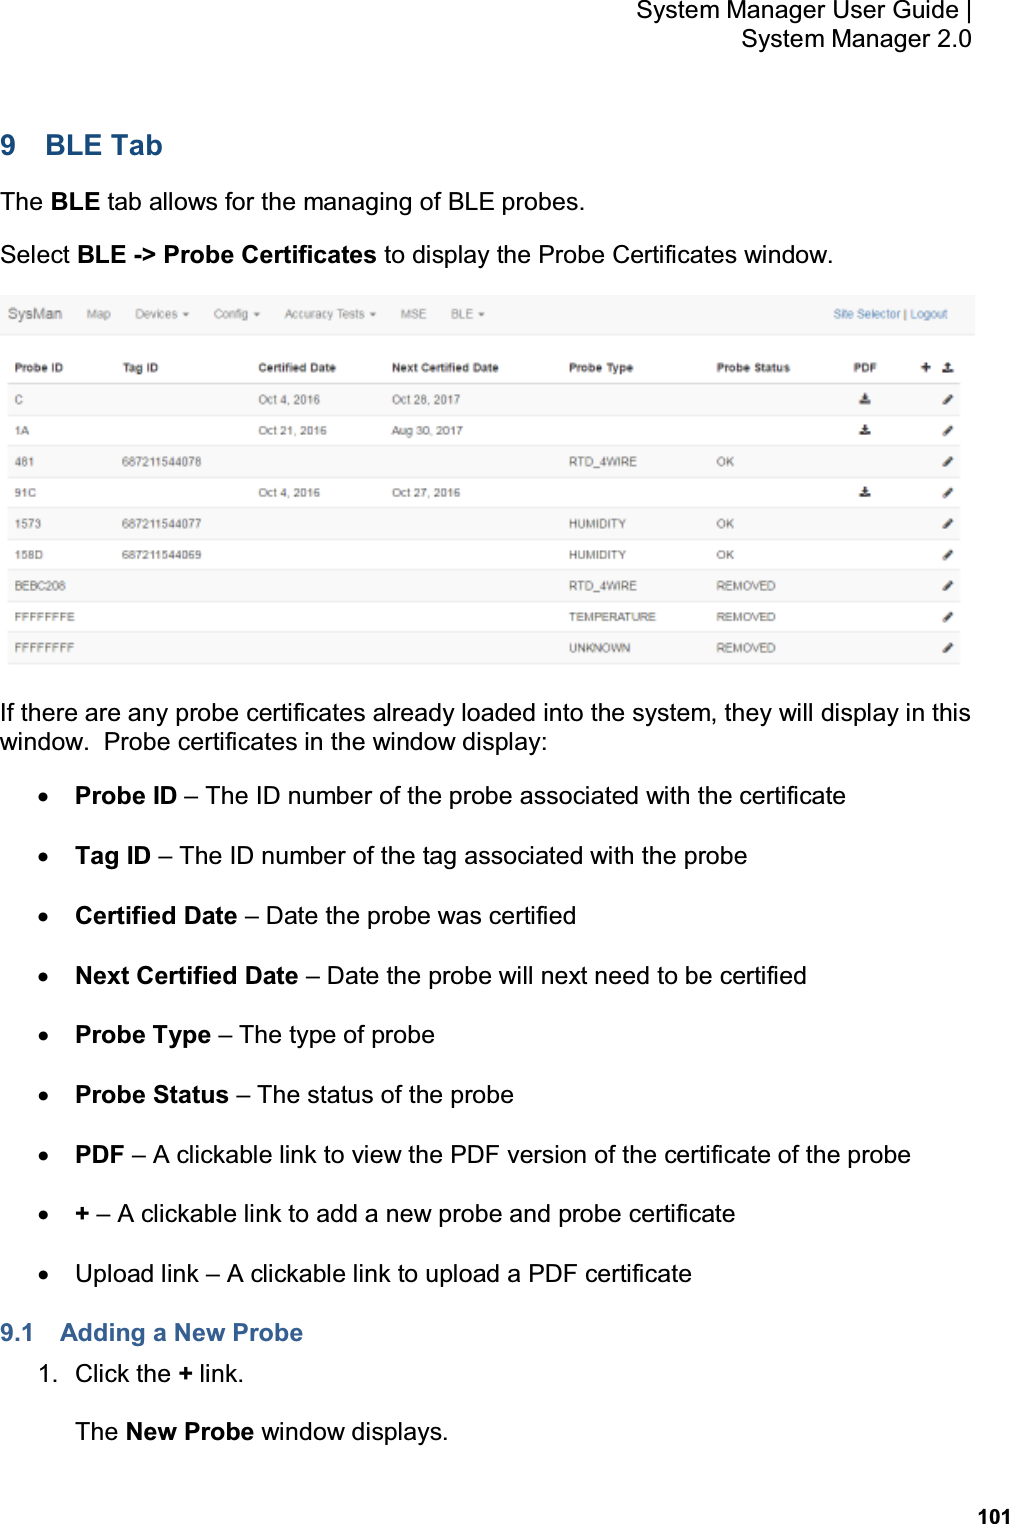           101 System Manager User Guide |  System Manager 2.0 9  BLE Tab The BLE tab allows for the managing of BLE probes. Select BLE -&gt; Probe Certificates to display the Probe Certificates window.    If there are any probe certificates already loaded into the system, they will display in this window.  Probe certificates in the window display: • Probe ID – The ID number of the probe associated with the certificate • Tag ID – The ID number of the tag associated with the probe • Certified Date – Date the probe was certified • Next Certified Date – Date the probe will next need to be certified • Probe Type – The type of probe • Probe Status – The status of the probe • PDF – A clickable link to view the PDF version of the certificate of the probe • + – A clickable link to add a new probe and probe certificate •  Upload link – A clickable link to upload a PDF certificate 9.1  Adding a New Probe 1.  Click the + link. The New Probe window displays. 